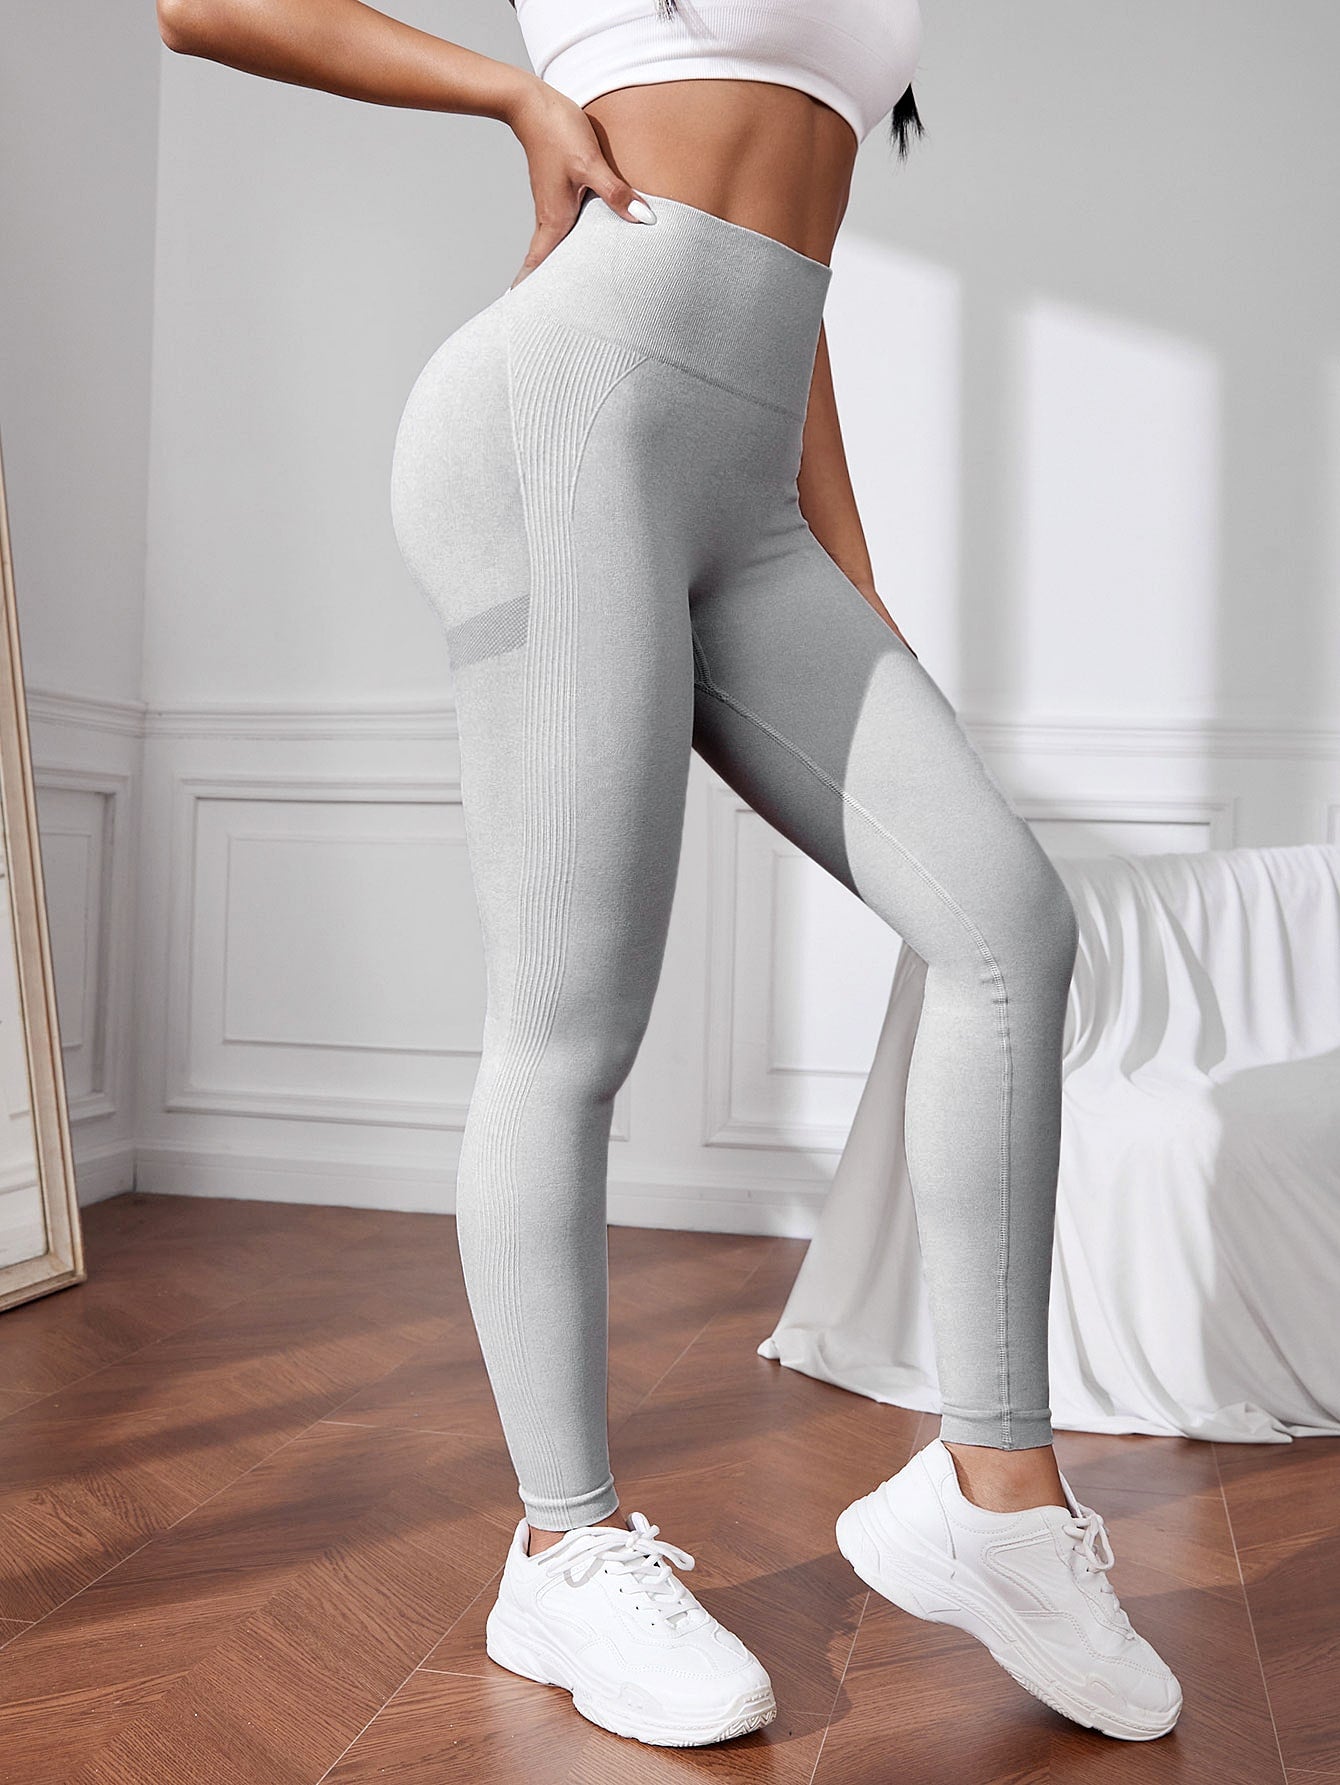 Direct Waist™ Seamless Workout Leggings – iBay Direct